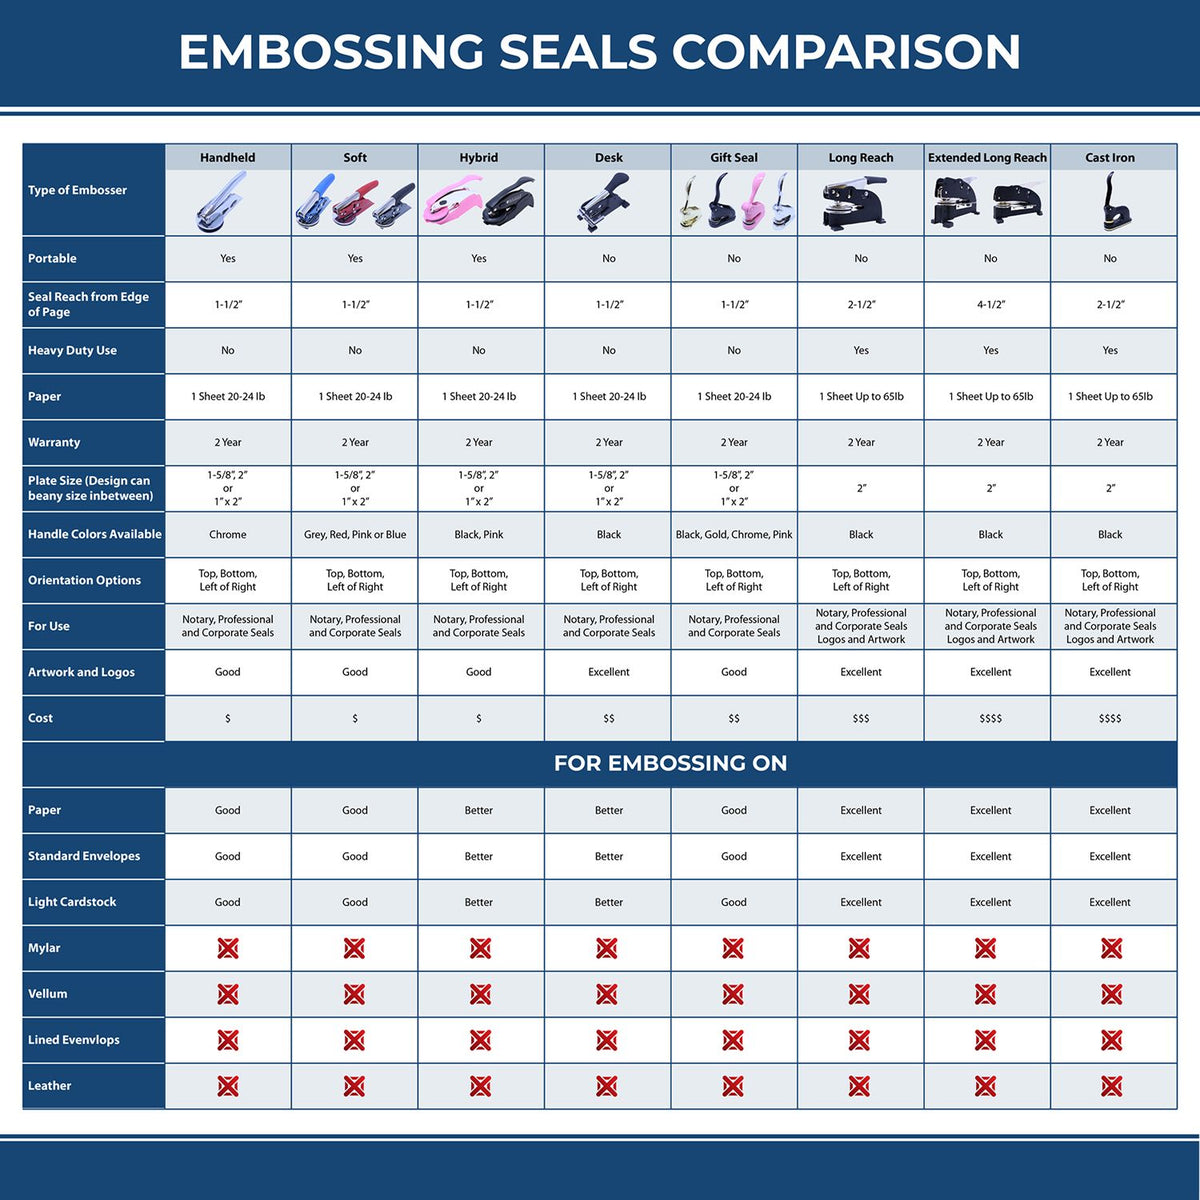 A comparison chart for the different types of mount models available for the Handheld Idaho Professional Engineer Embosser.